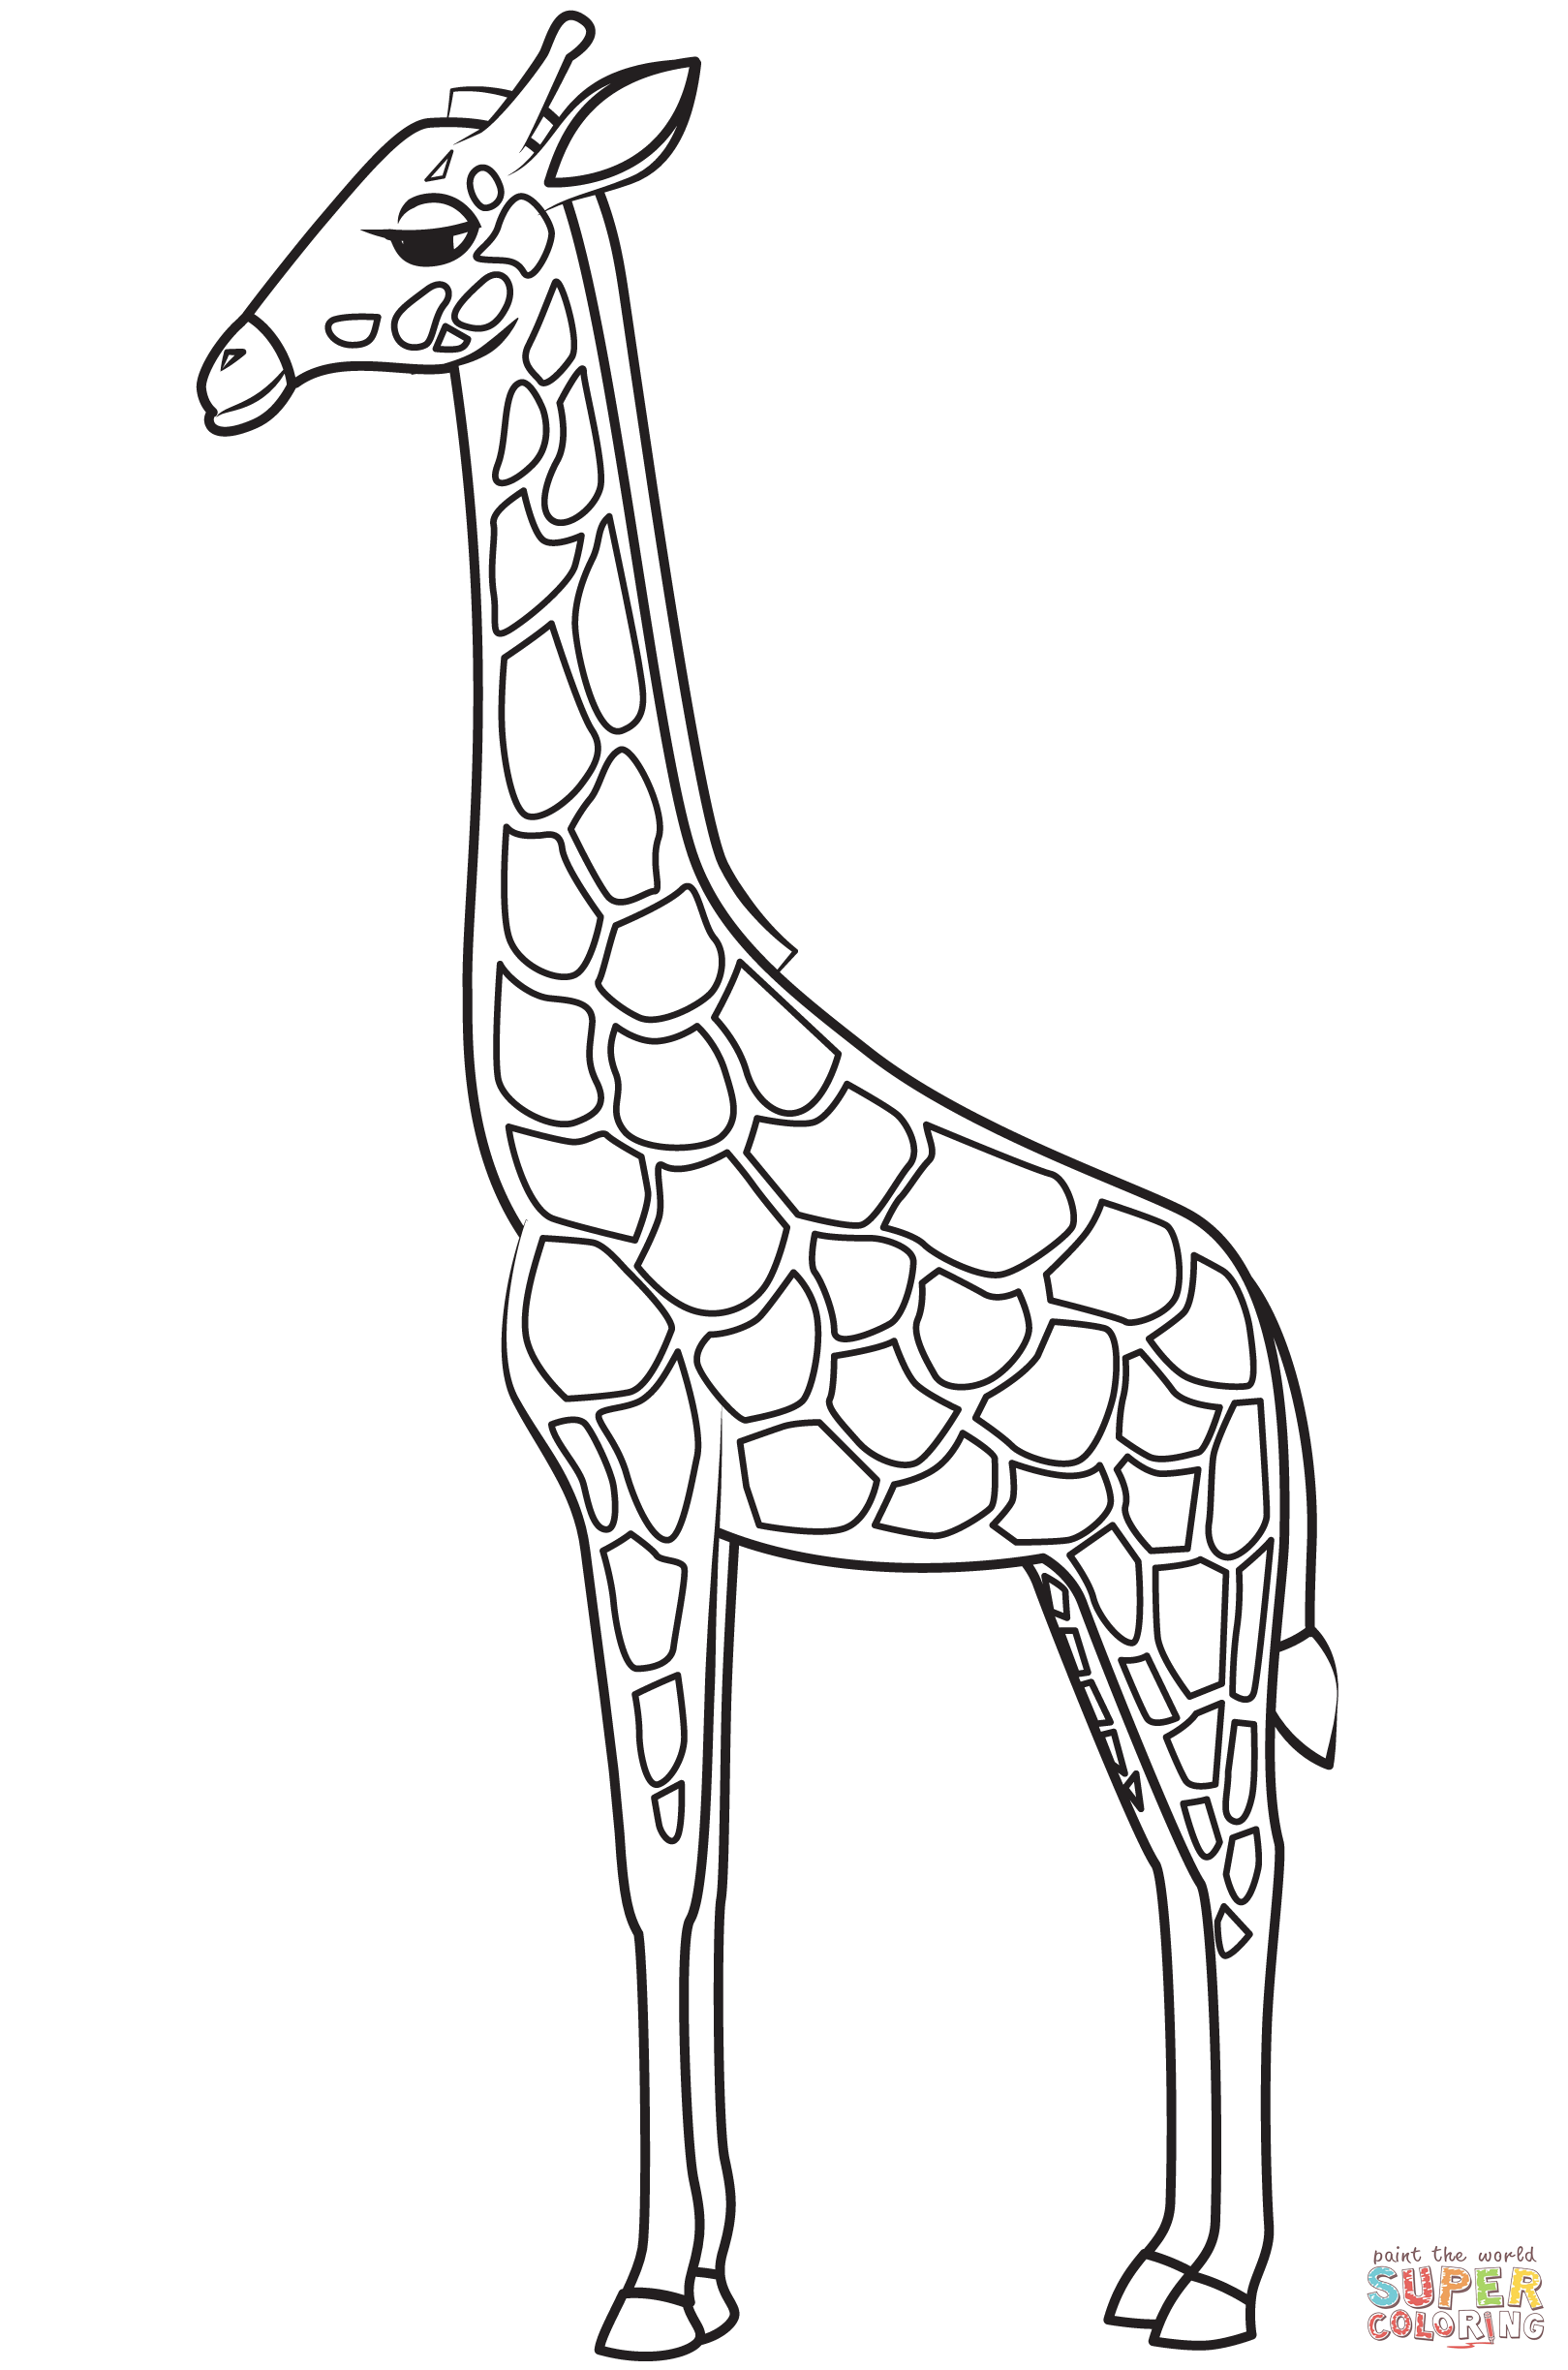 Giraffe coloring page free printable coloring pages